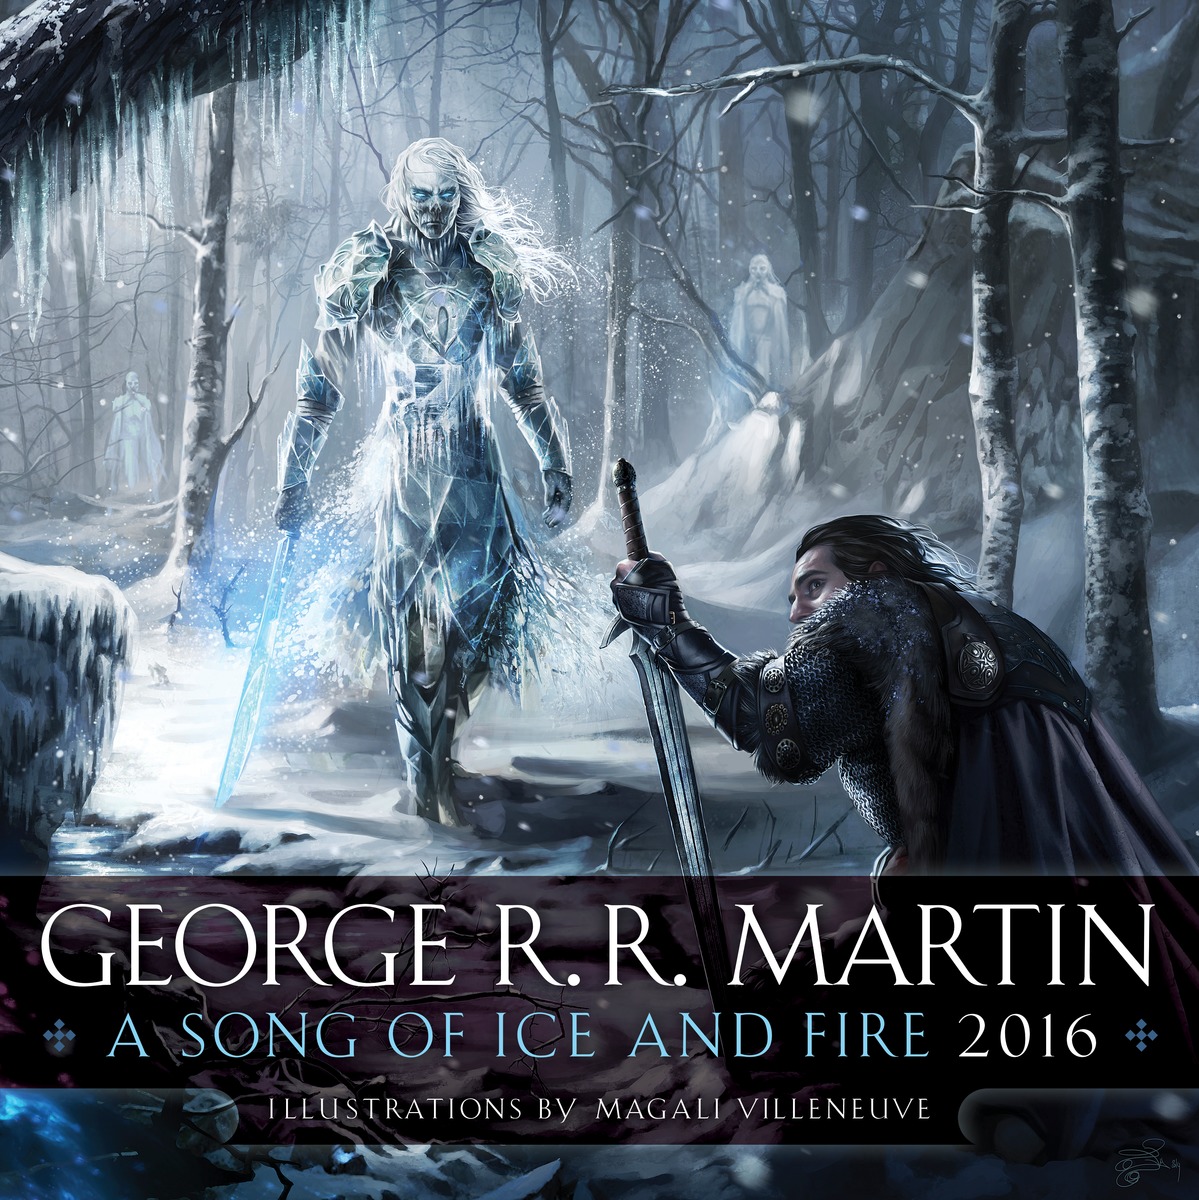 SONG OF ICE AND FIRE 2016